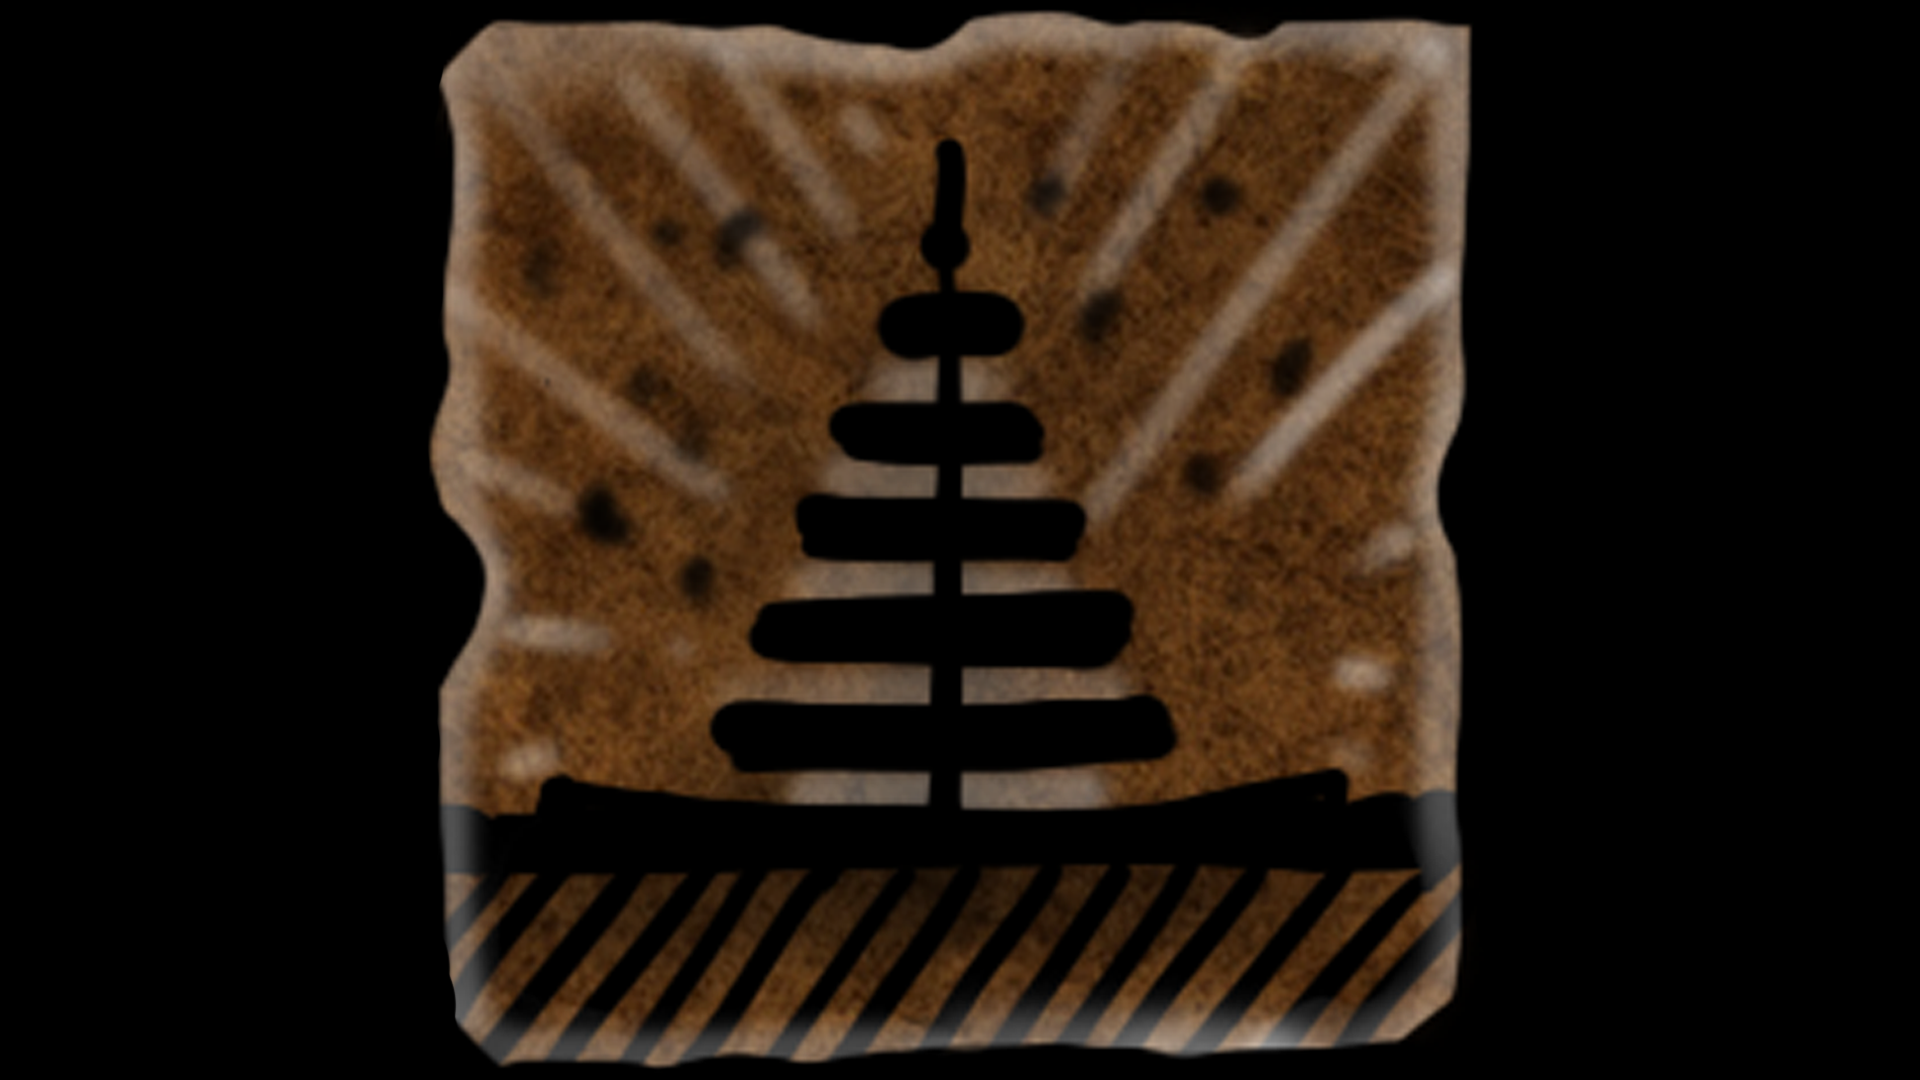 Icon for Tower of Hanoi